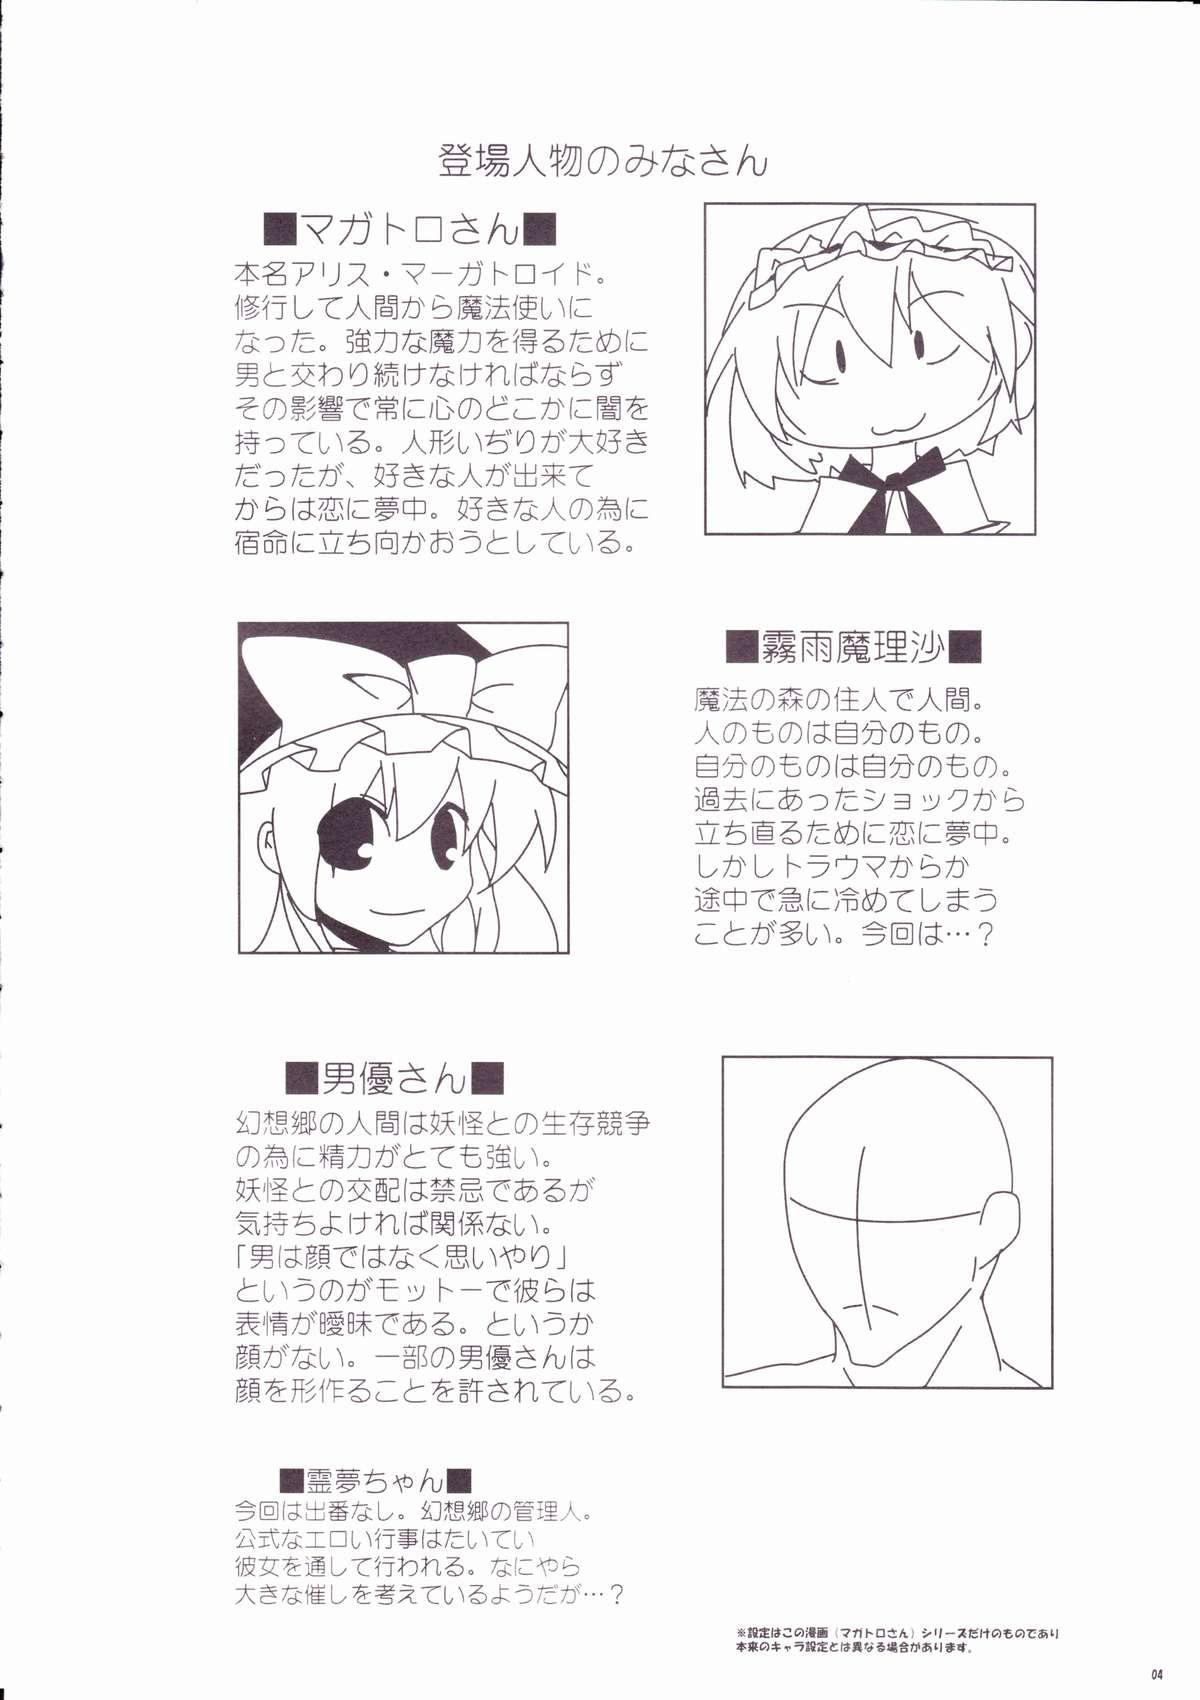 Amature Allure Magatroll - Touhou project Seduction Porn - Page 3